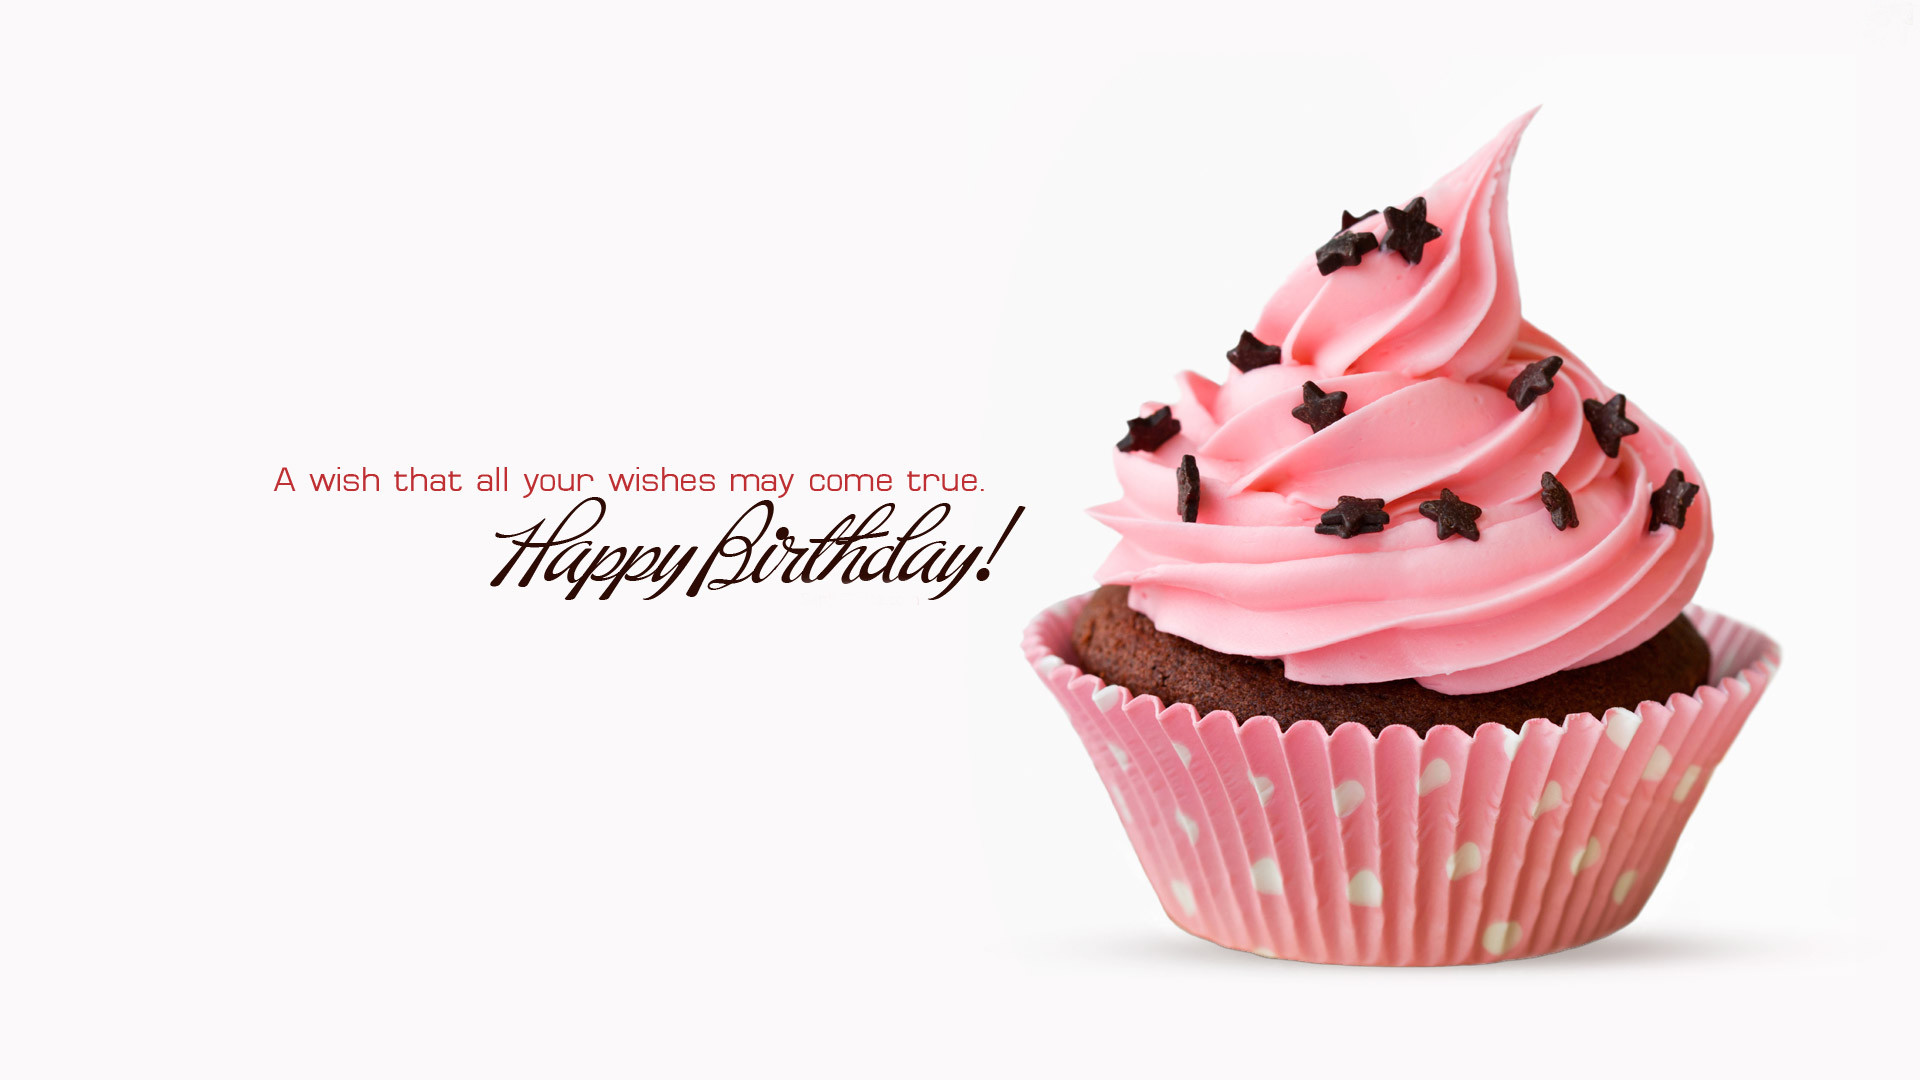 1920x1080 Happy Birthday Cake Collection: .GKGK Happy Birthday Cake Wallpapers –  download for free